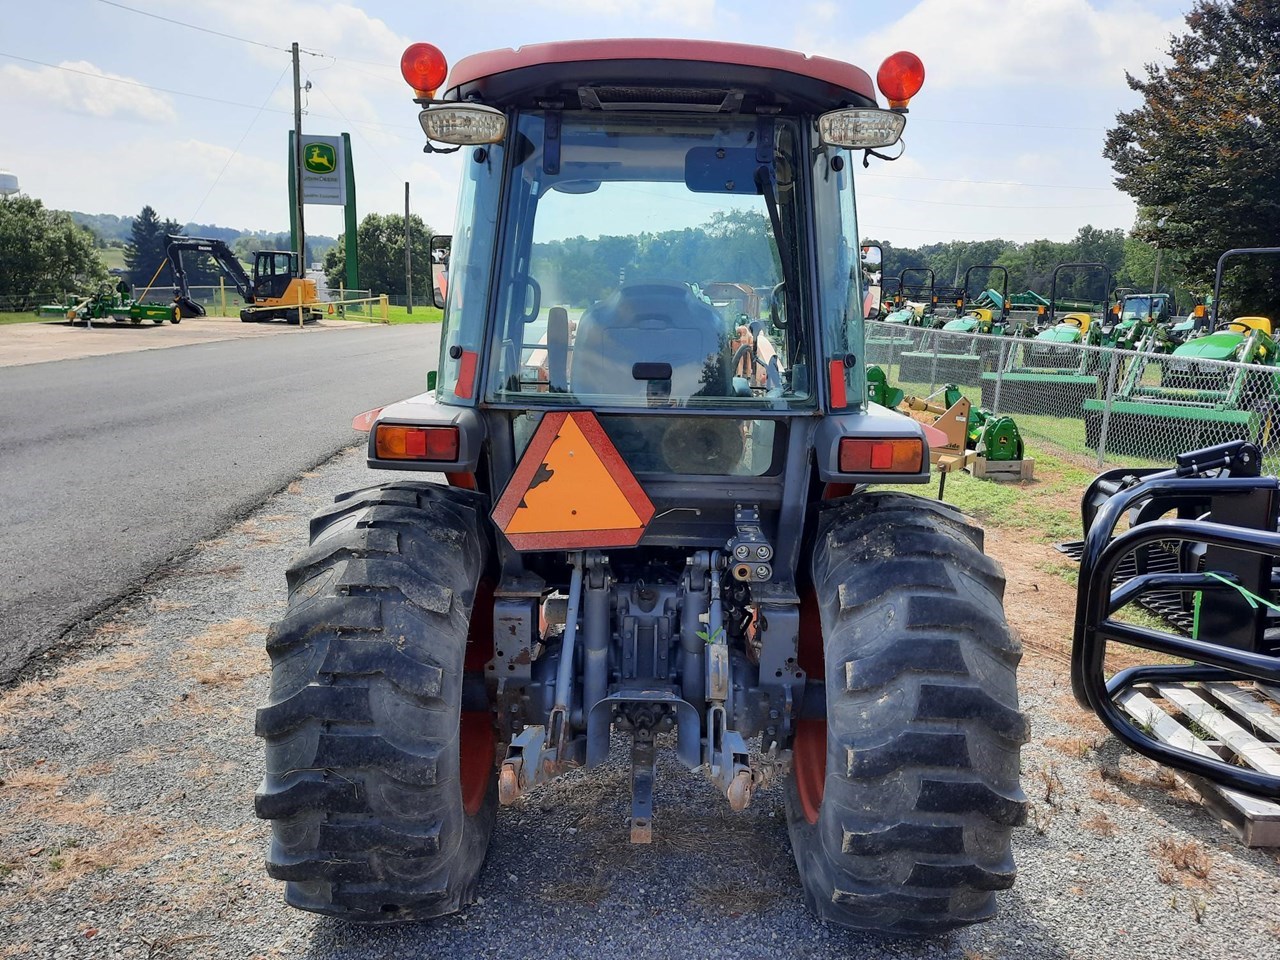 2012 Kubota L4740 Tractor - Compact Utility For Sale